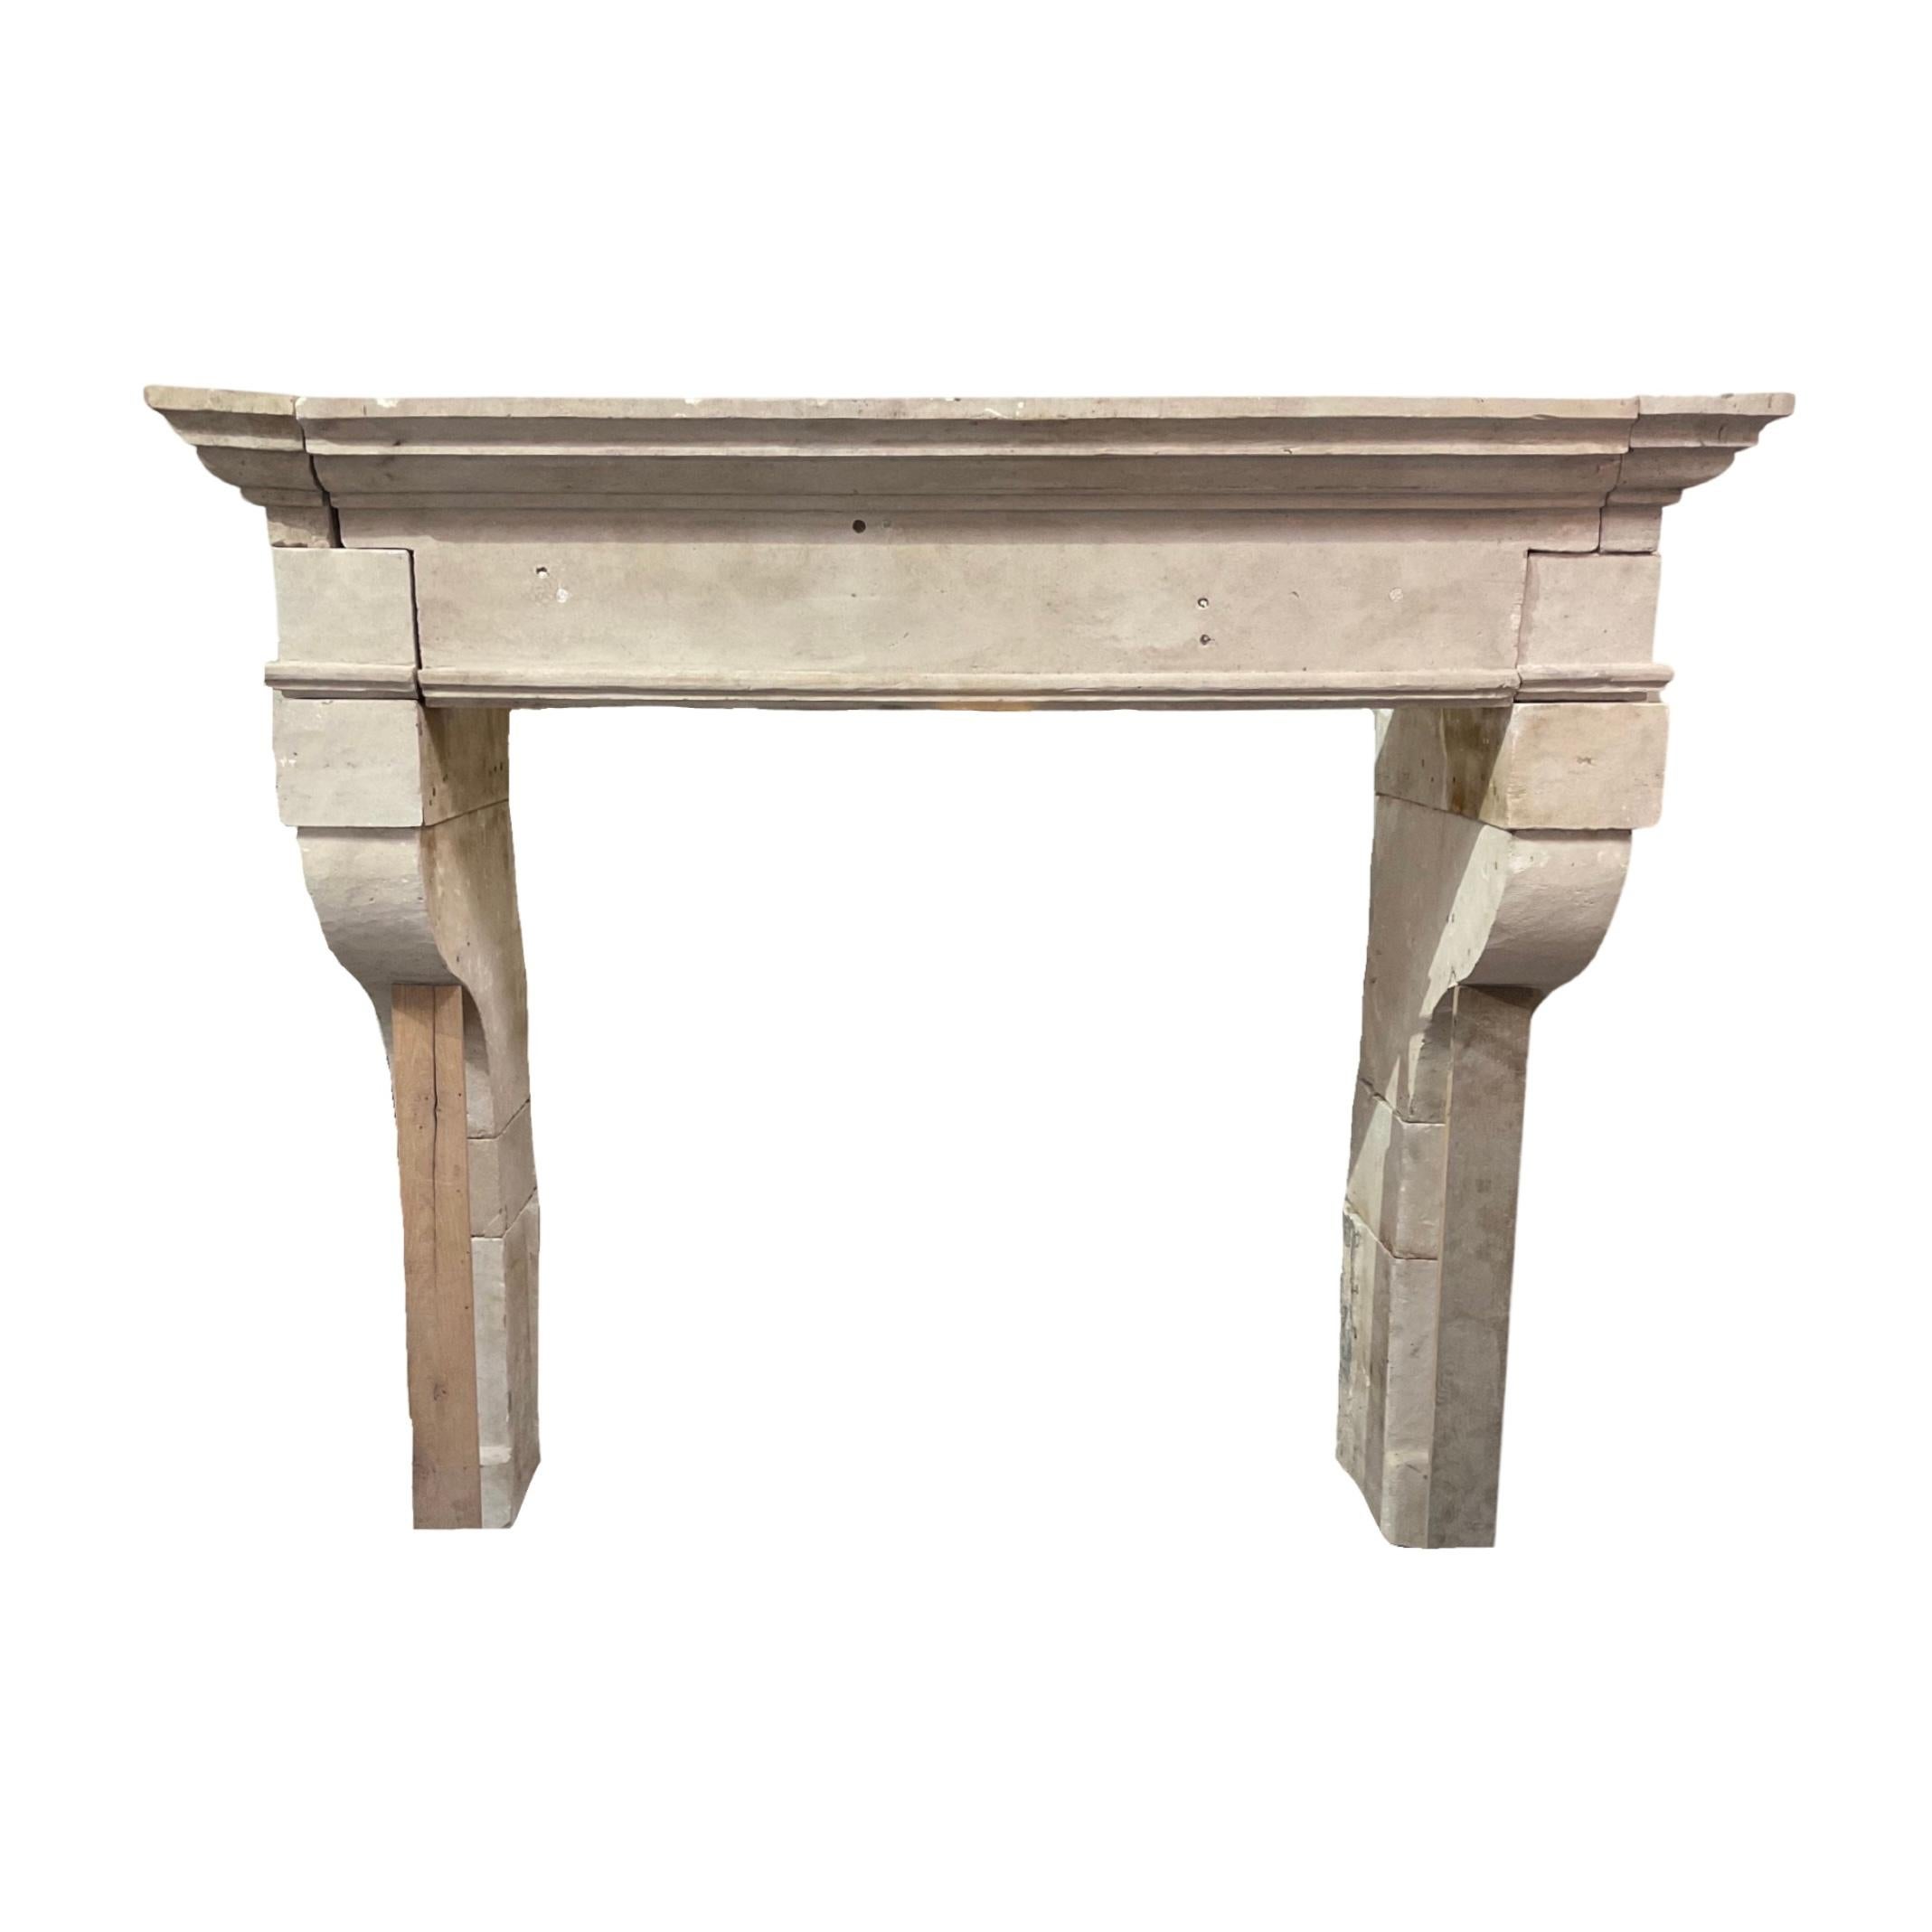 This regal French Limestone Louis XVI Mantel adds timeless elegance to your decor. Boasting a classic Louis XVI style from 1750, this limestone mantel is the perfect addition to the French chateau. Refined and understated, it will add a lasting